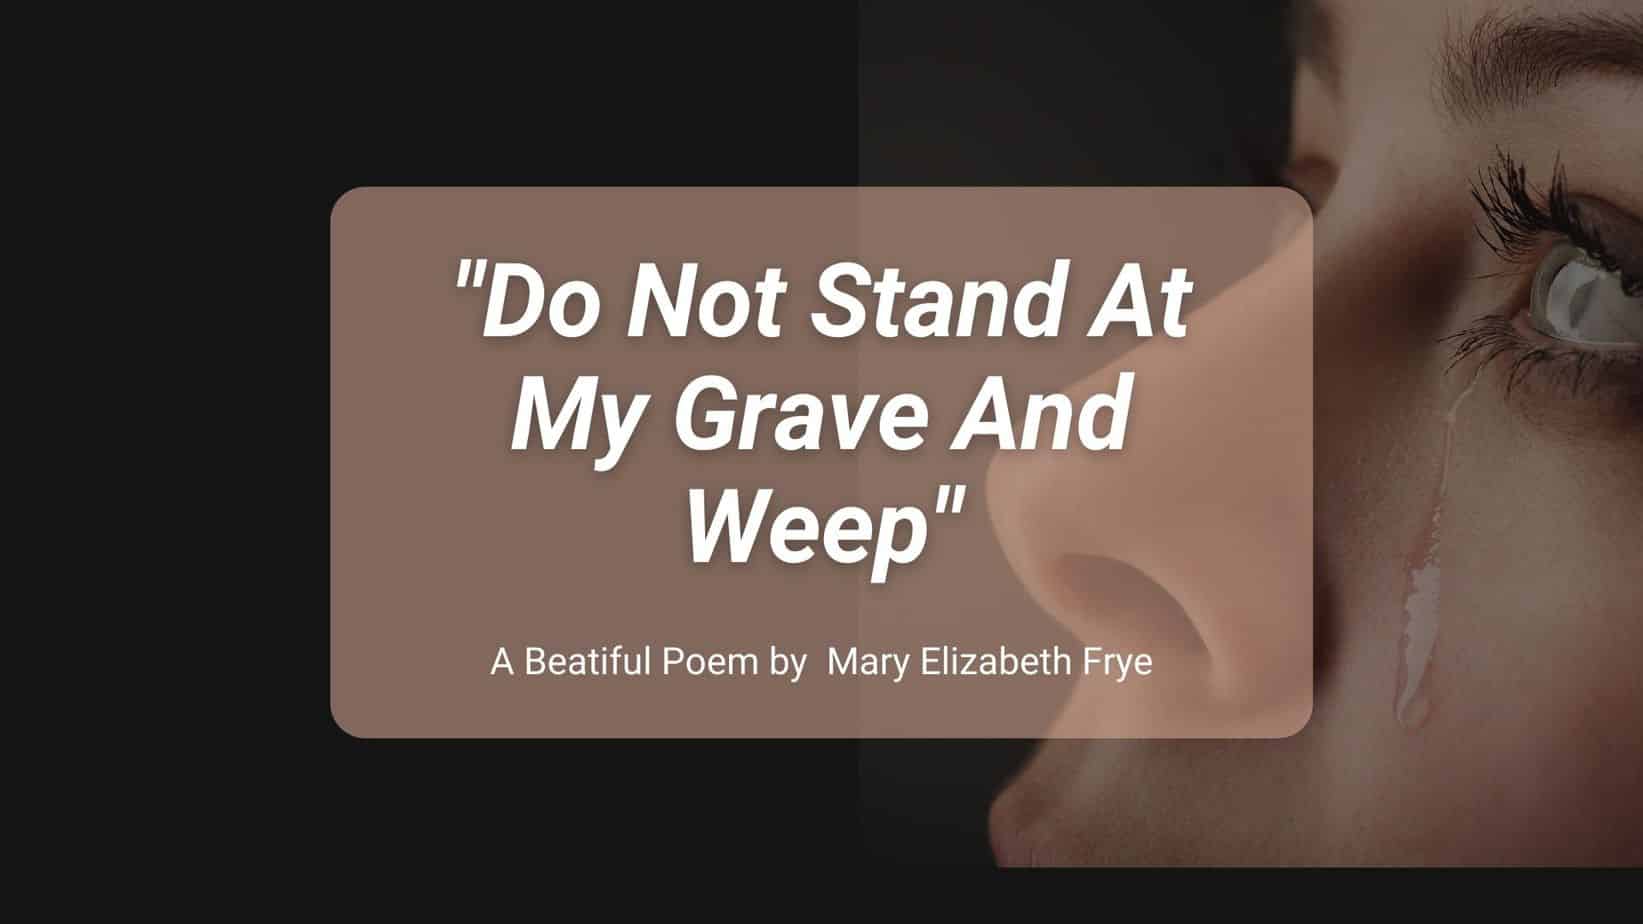 poem do not stand at my grave and weep words